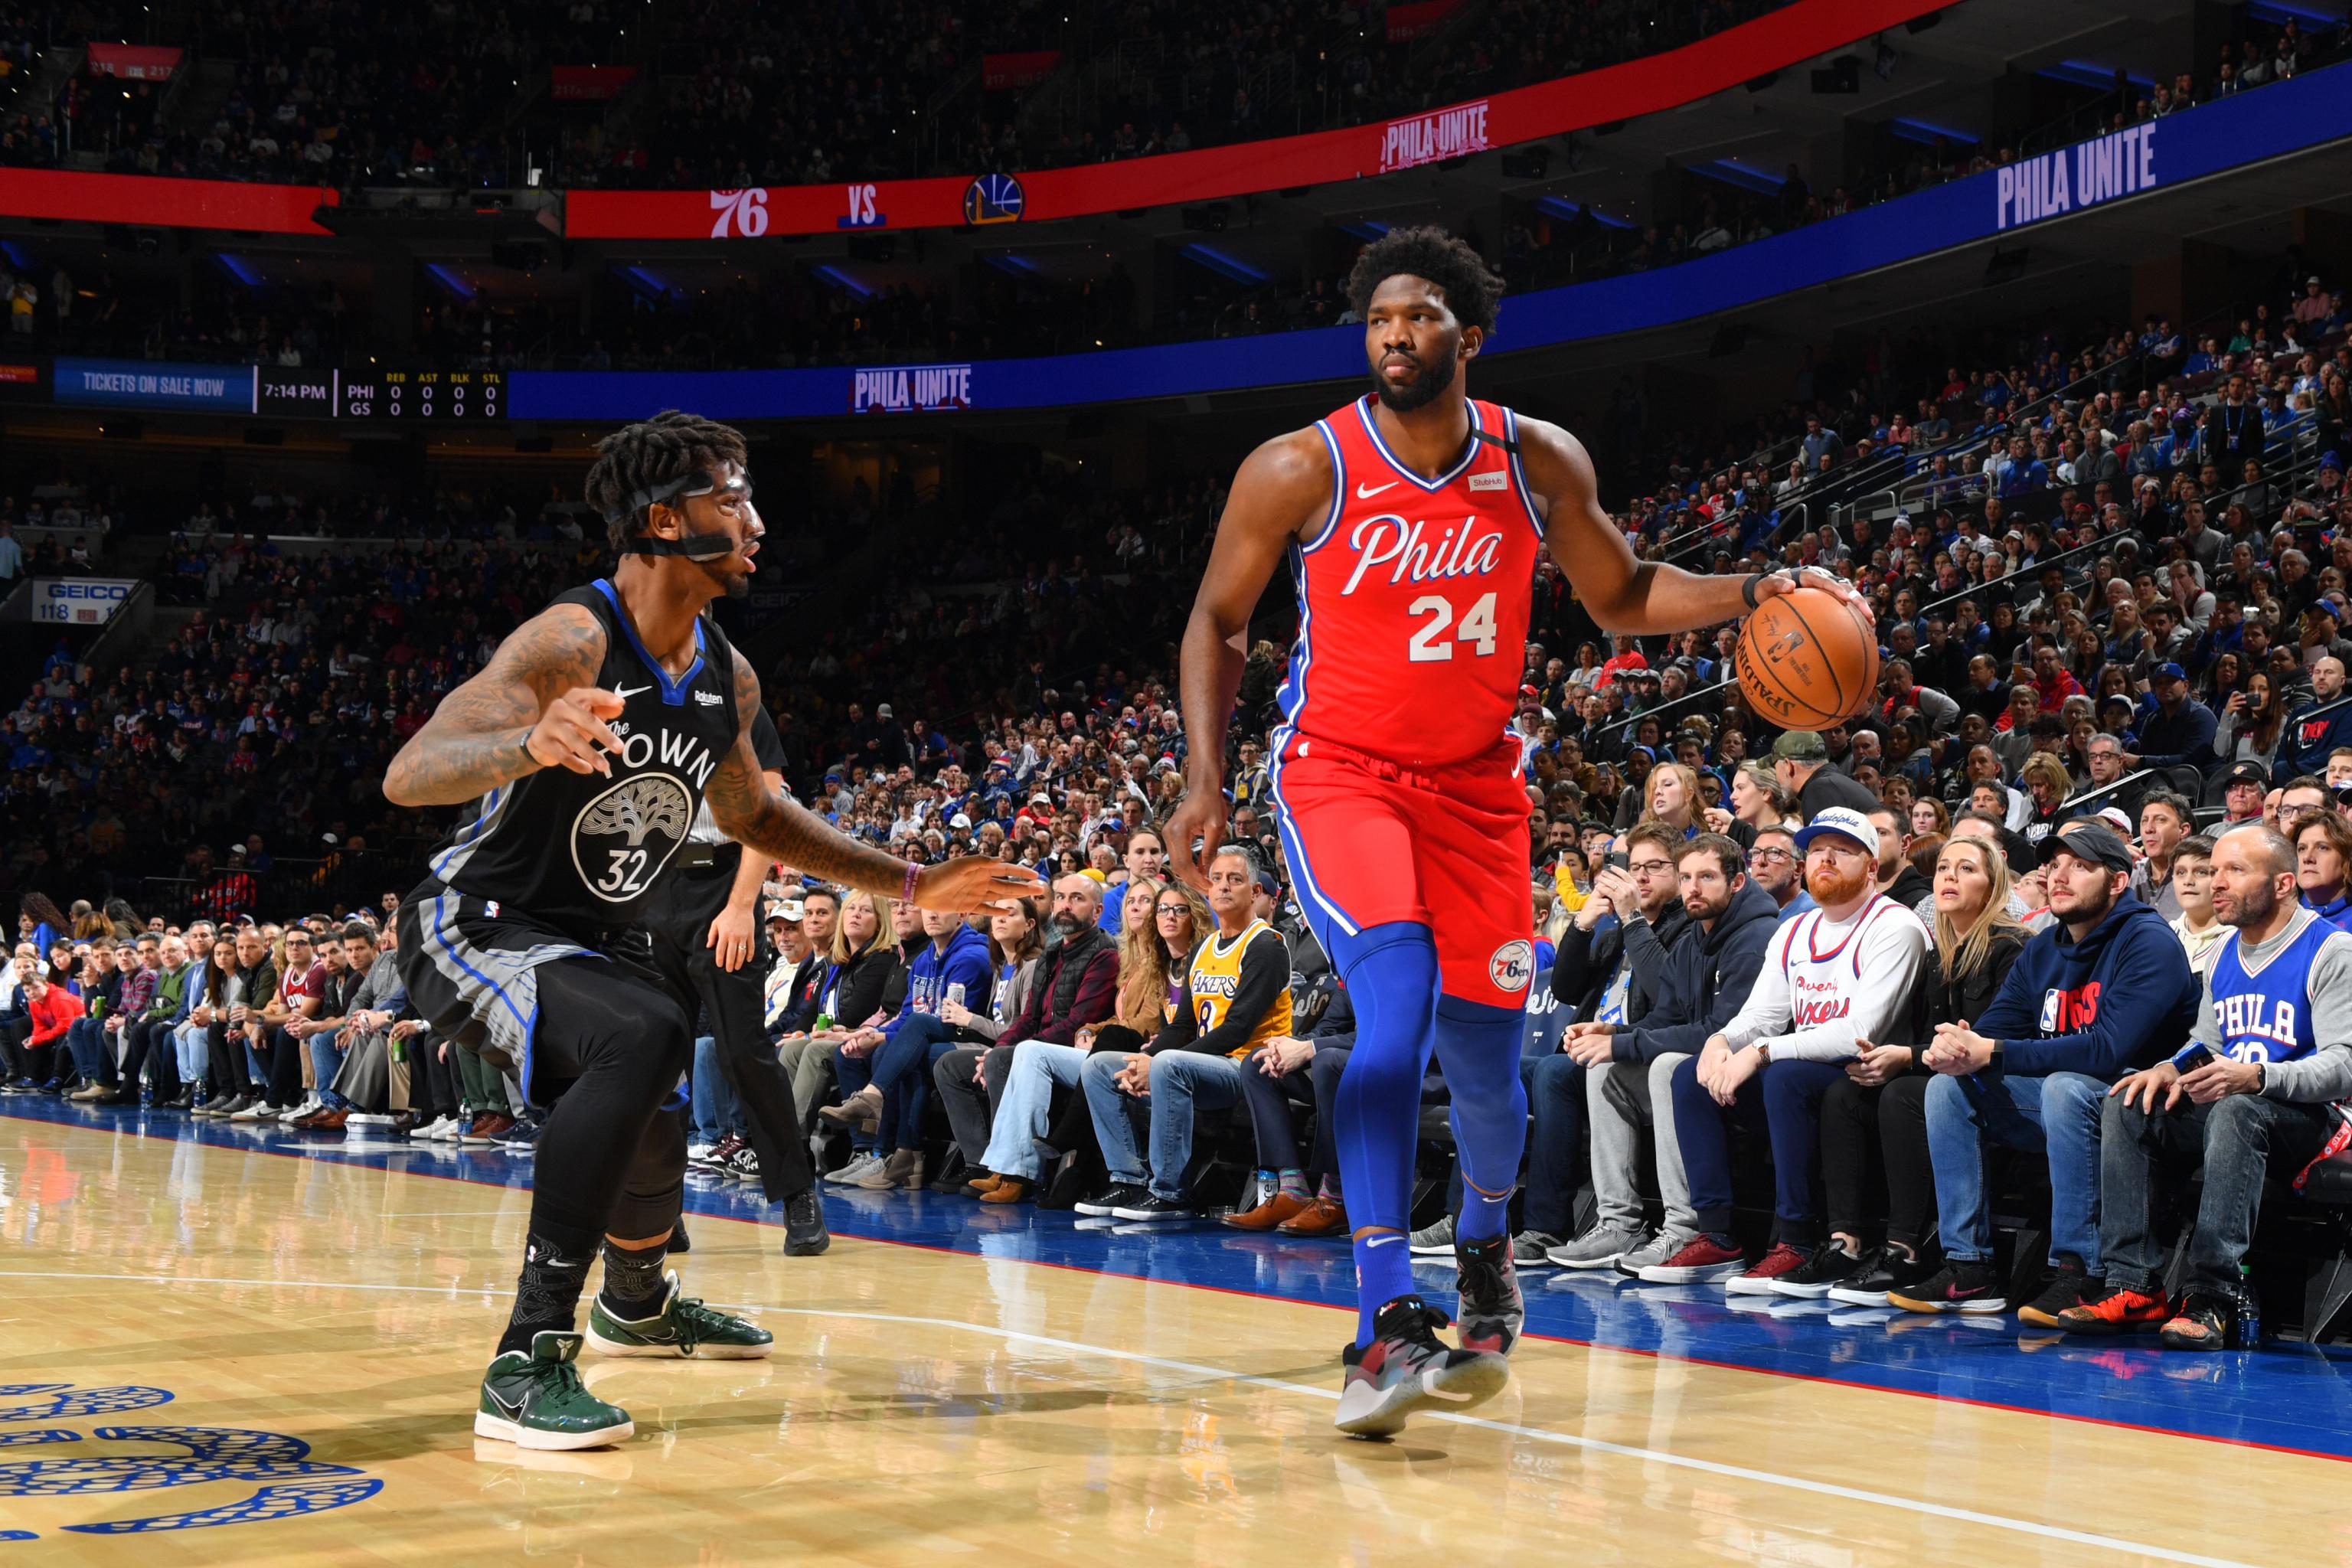 Joel Embiid wears No. 24 and scores 24 points as 76ers honor late